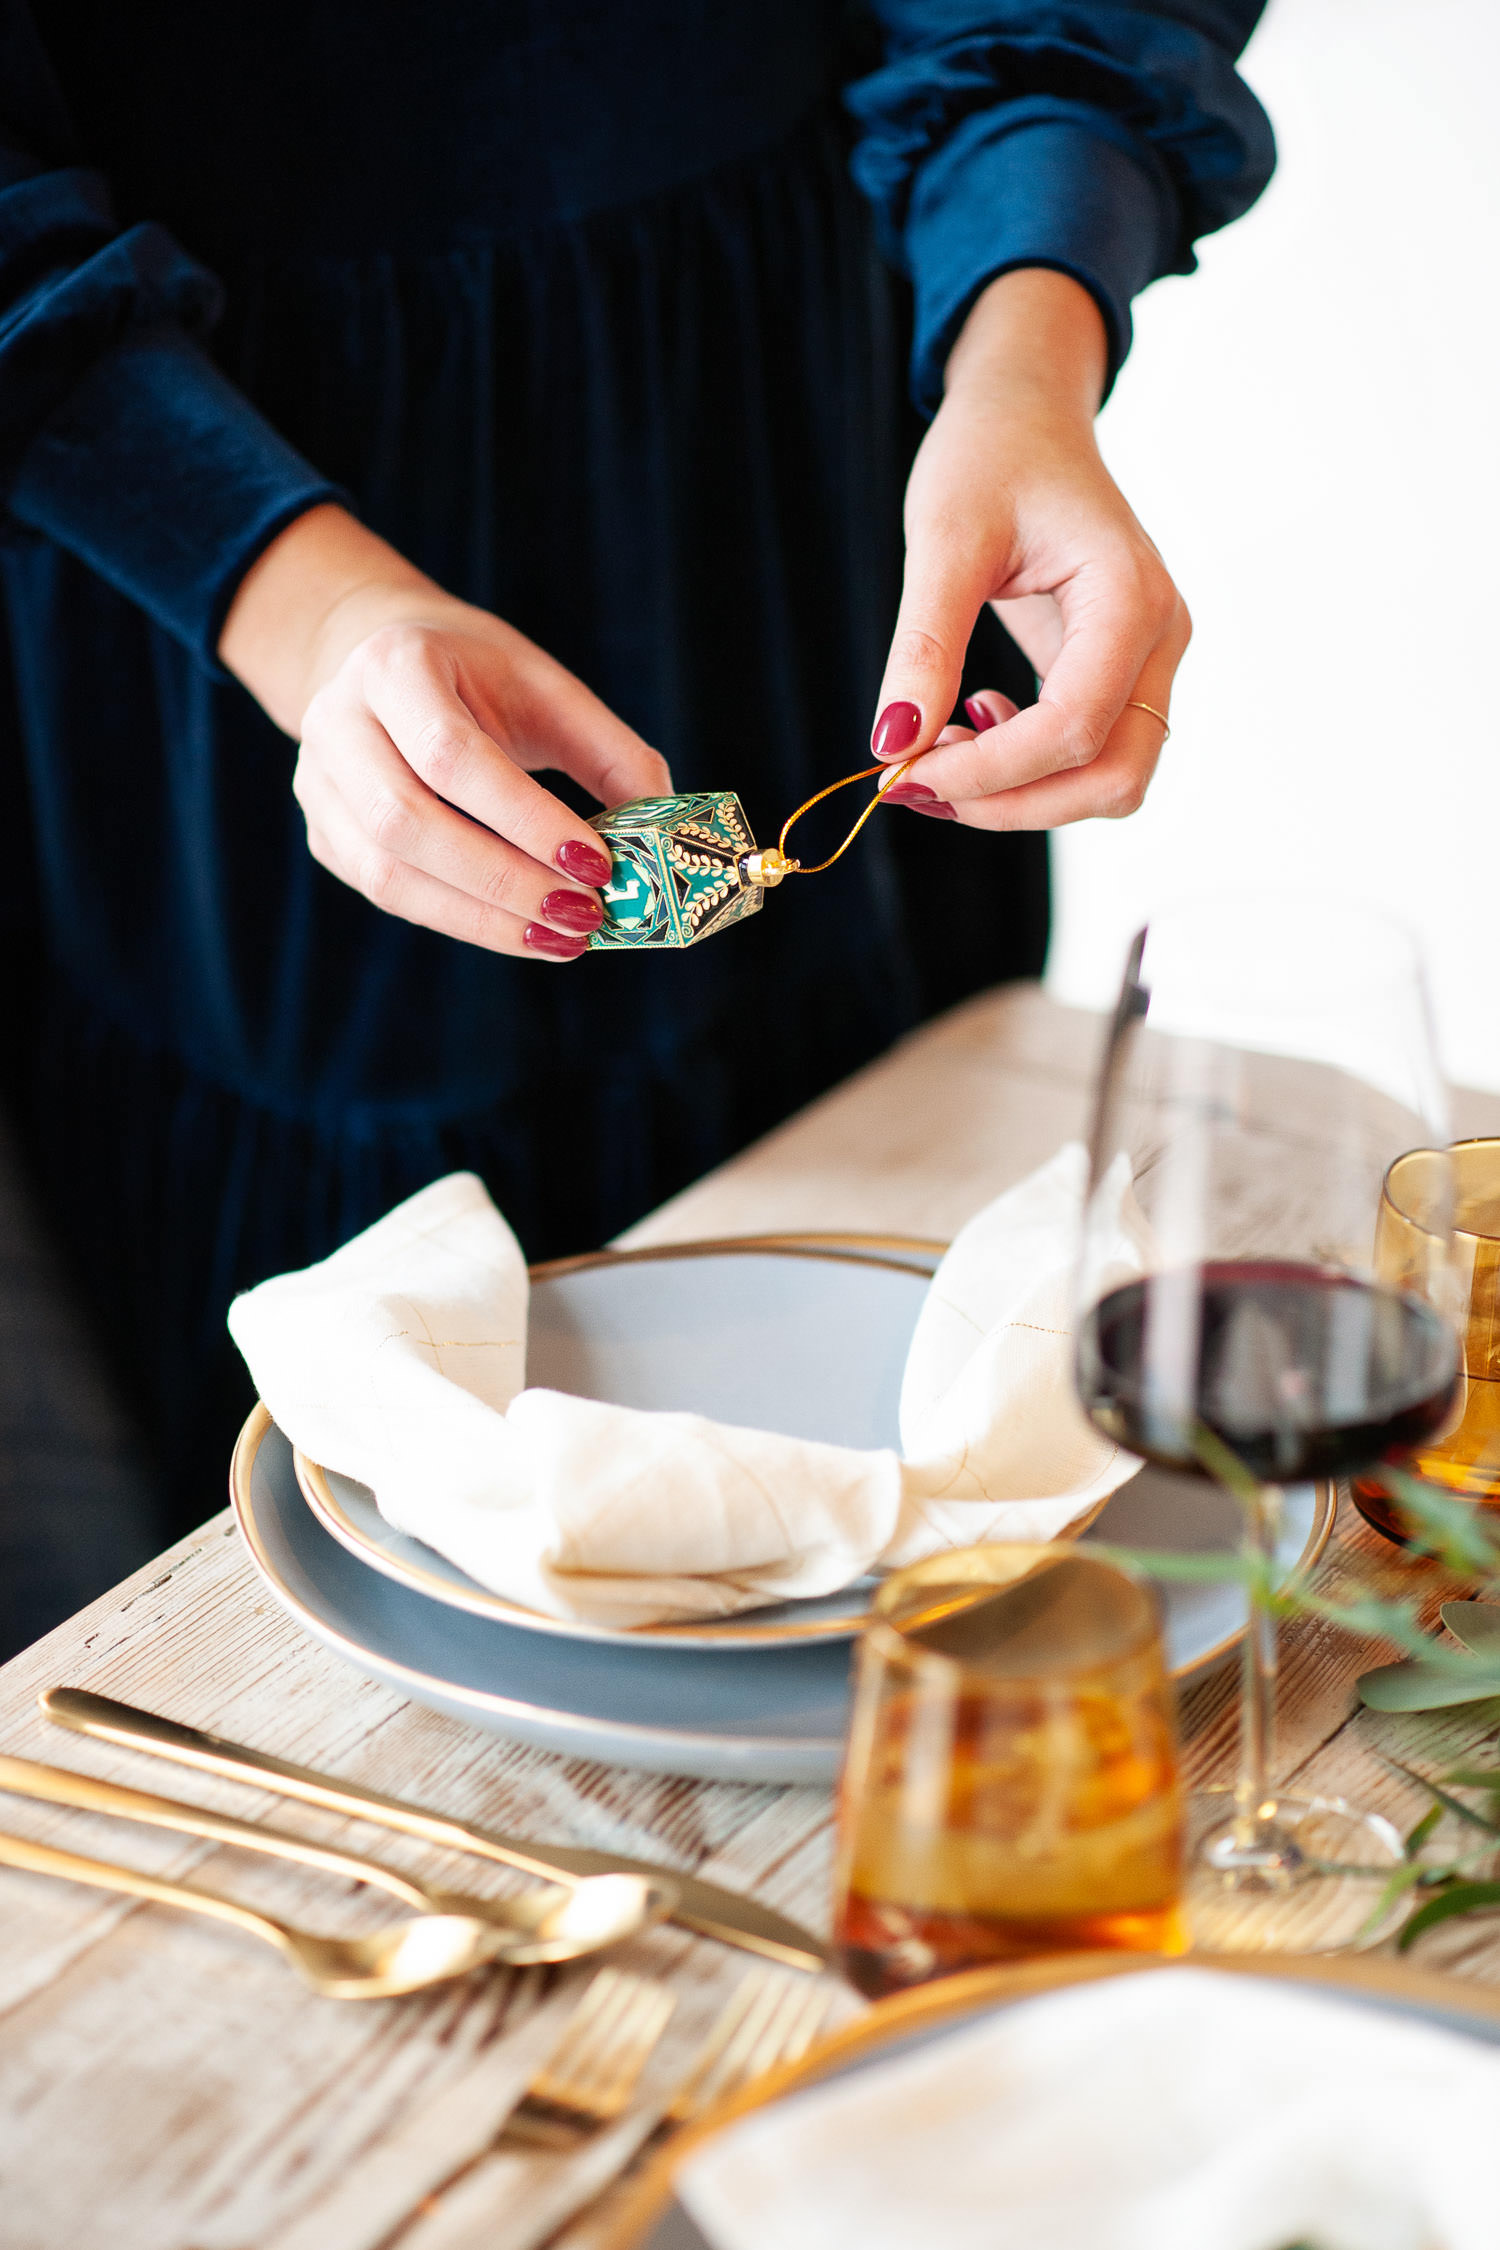 Evelyn from 206 Event Co. places dreidels on Hanukkah table captured by Tara Whittaker Photography